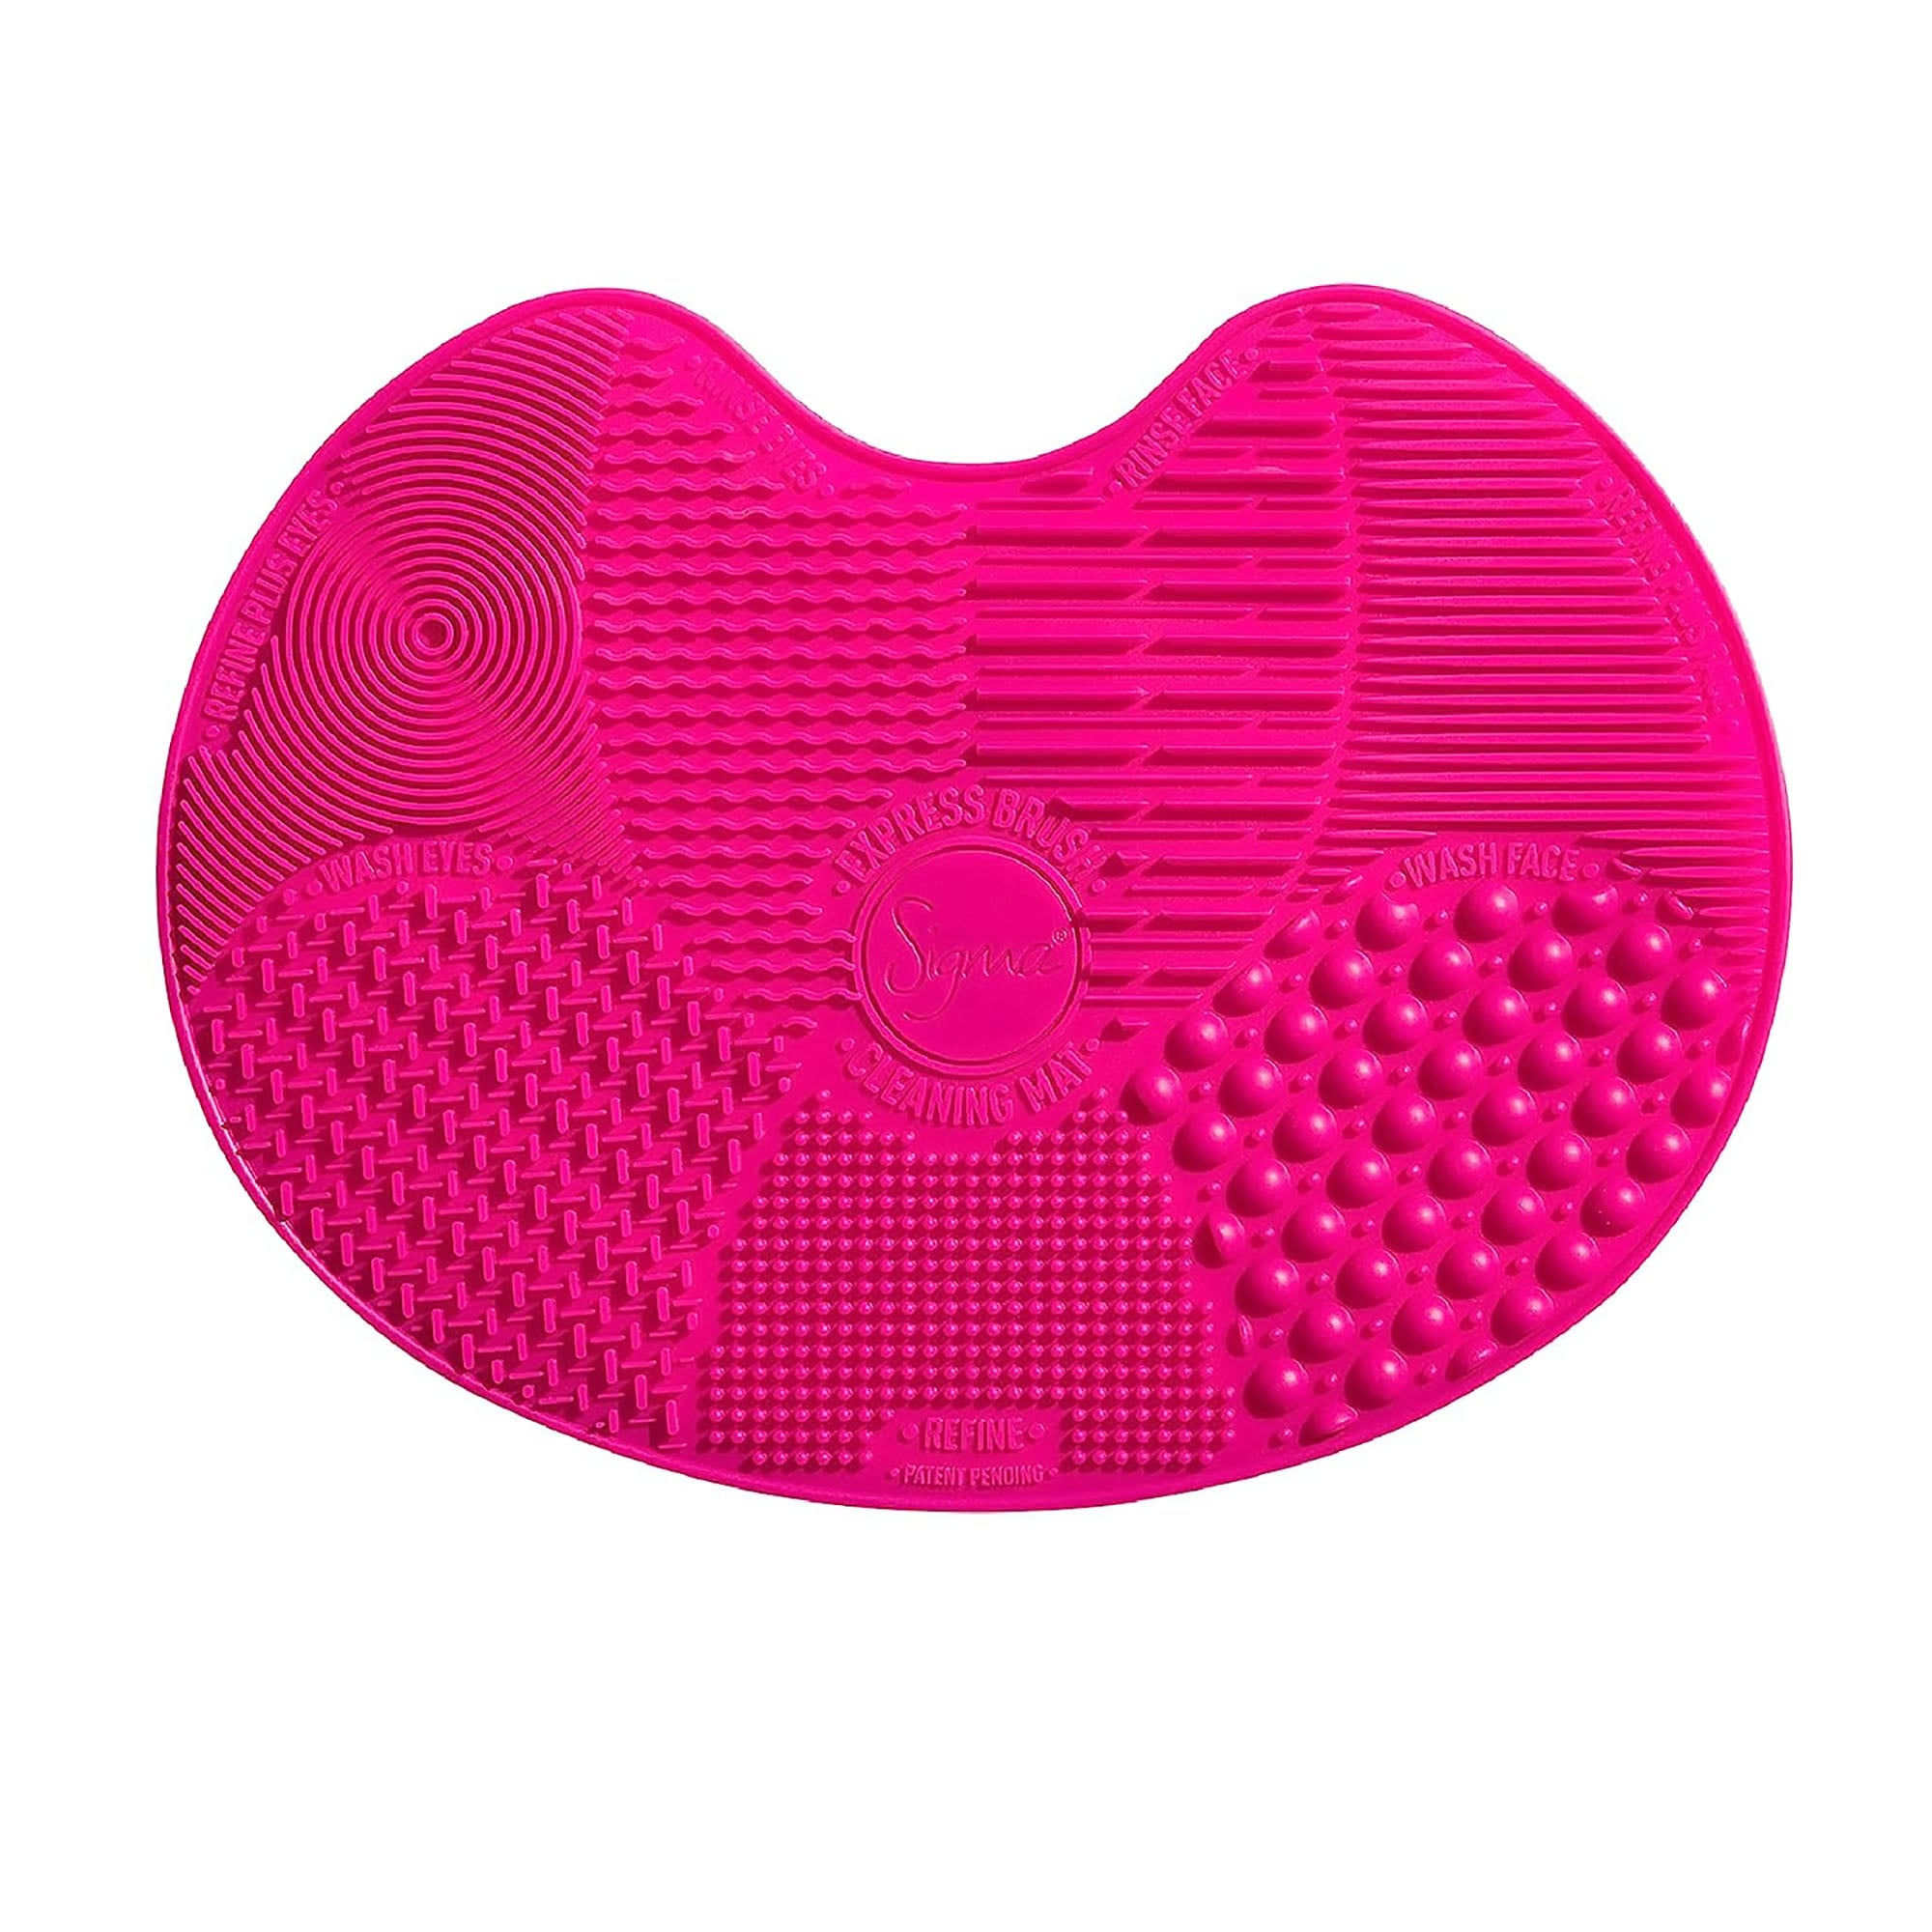 Sigma Beauty Spa Brush Cleaning Mat